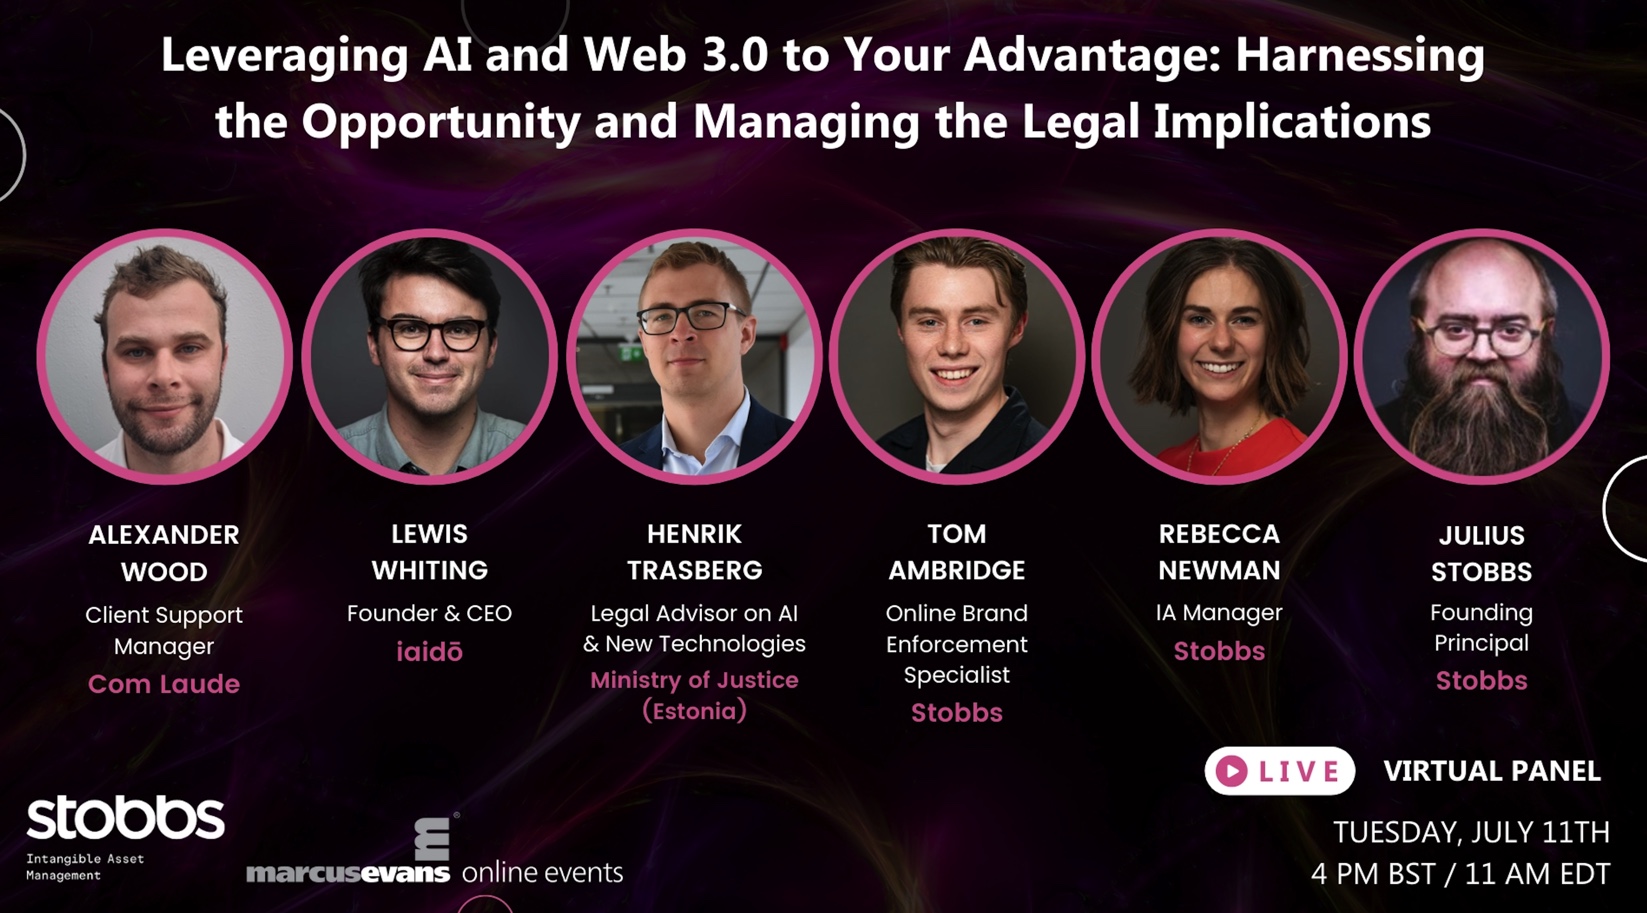 Stobbs to host 'Leveraging AI and Web 3.0 to your advantage: harnessing the opportunity and managing the legal implications'